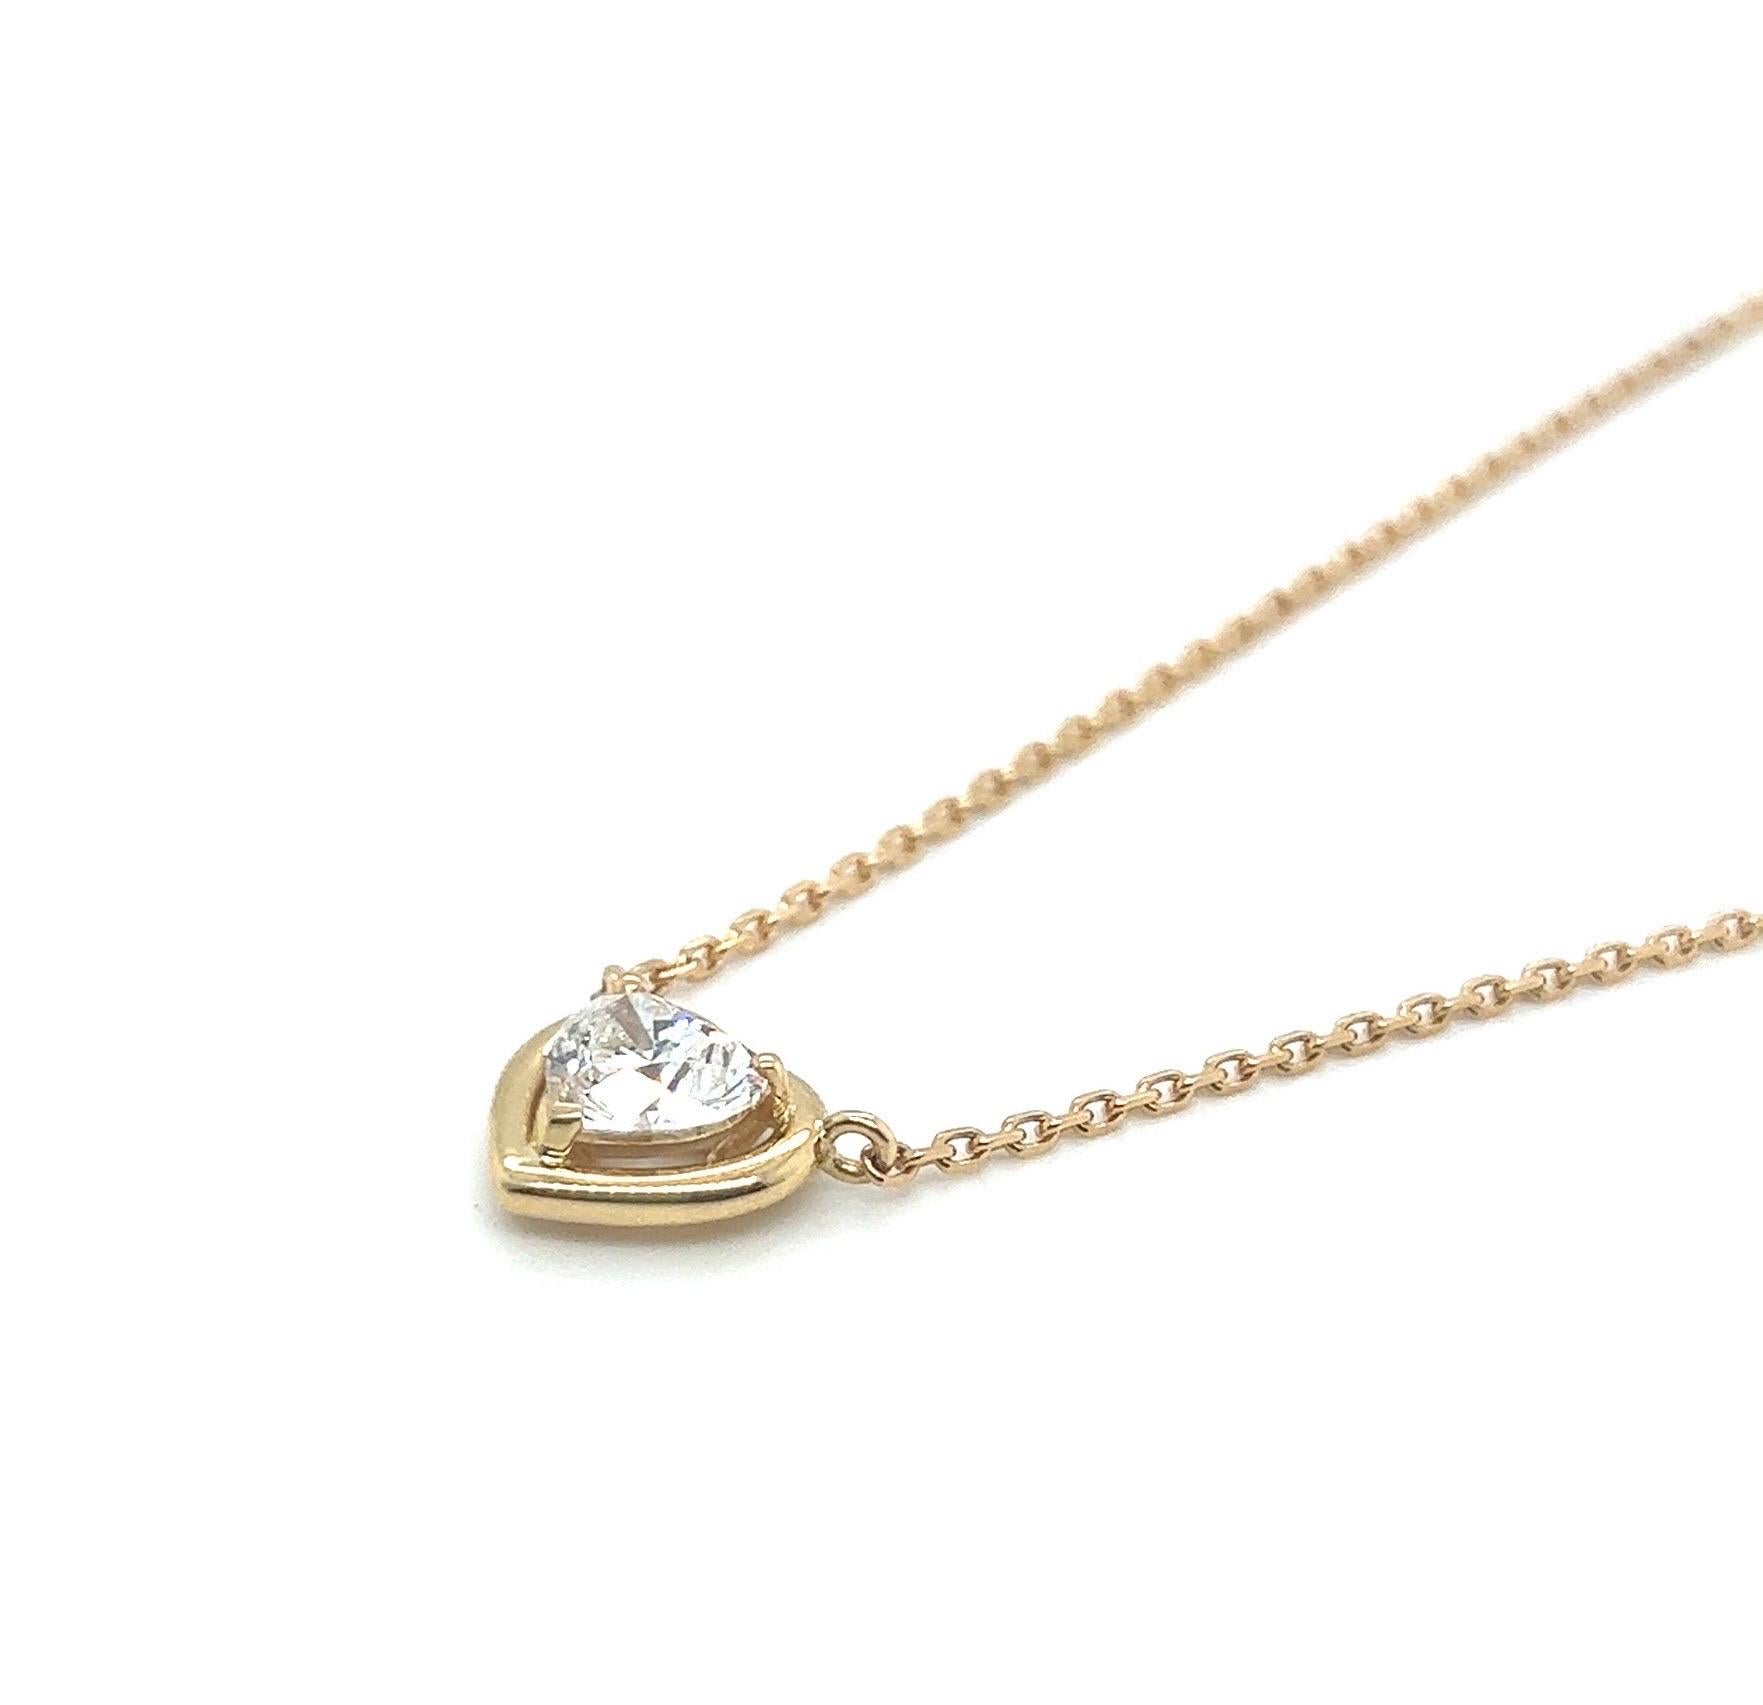 Elegant GIA certified 1.06 carat heart-shaped diamond and 18 karat yellow gold necklace.

Crafted in yellow gold 750, the necklace centers upon a heart-shaped diamond of 1.06 carats, F / VS1, set in a heart-shaped three-prong setting. It is